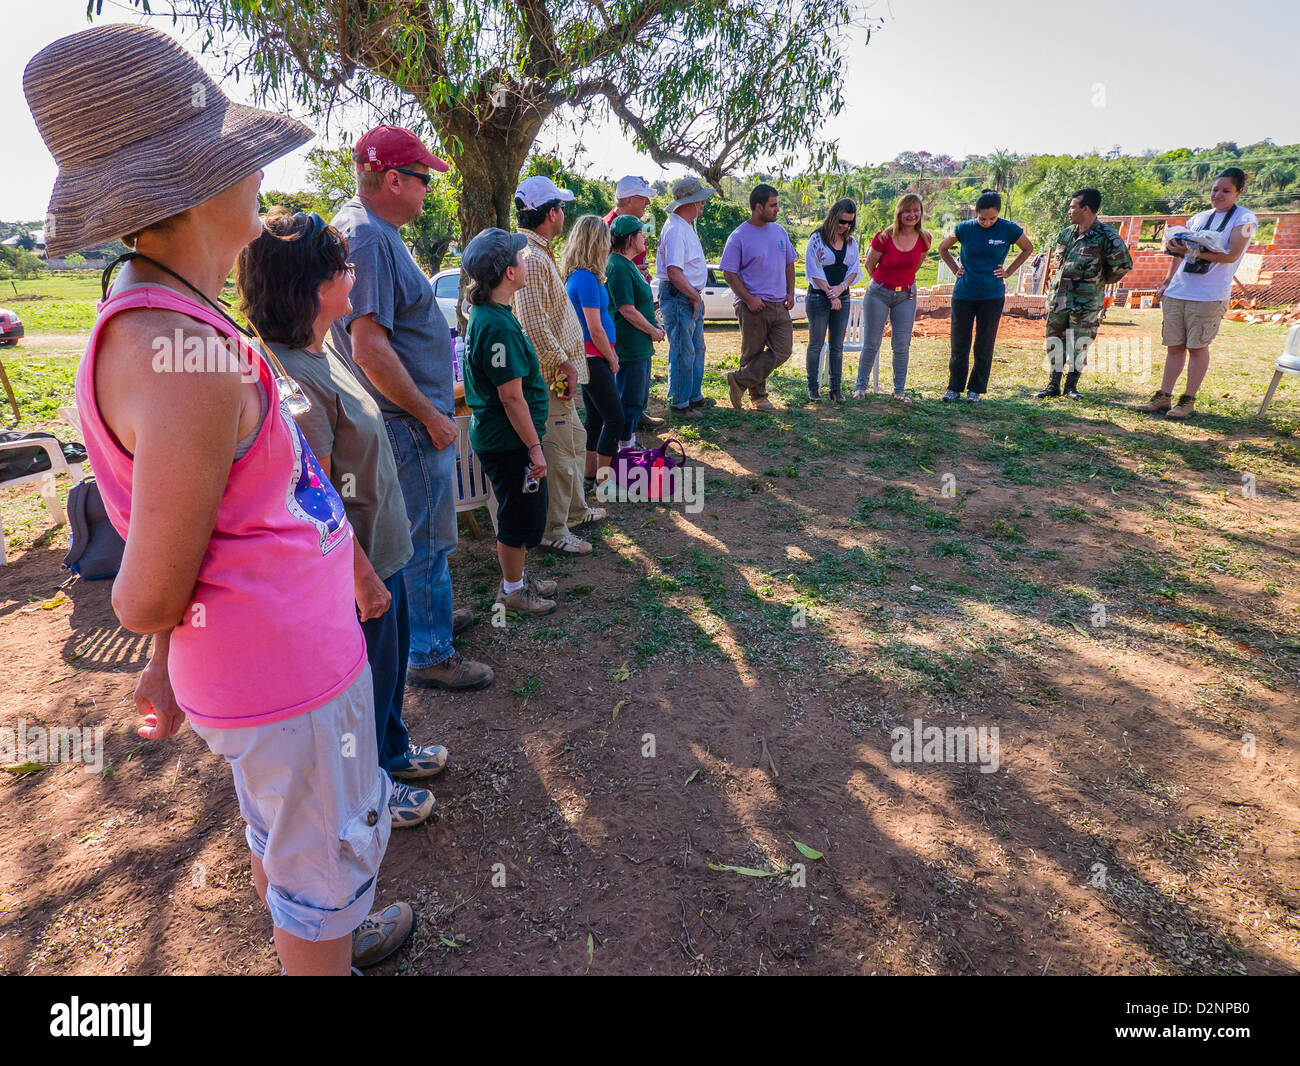 Adult volunteers for Habitat for Humanity stand in a circle at a ceremony for their work in building a house in Luque, Paraguay. Stock Photo